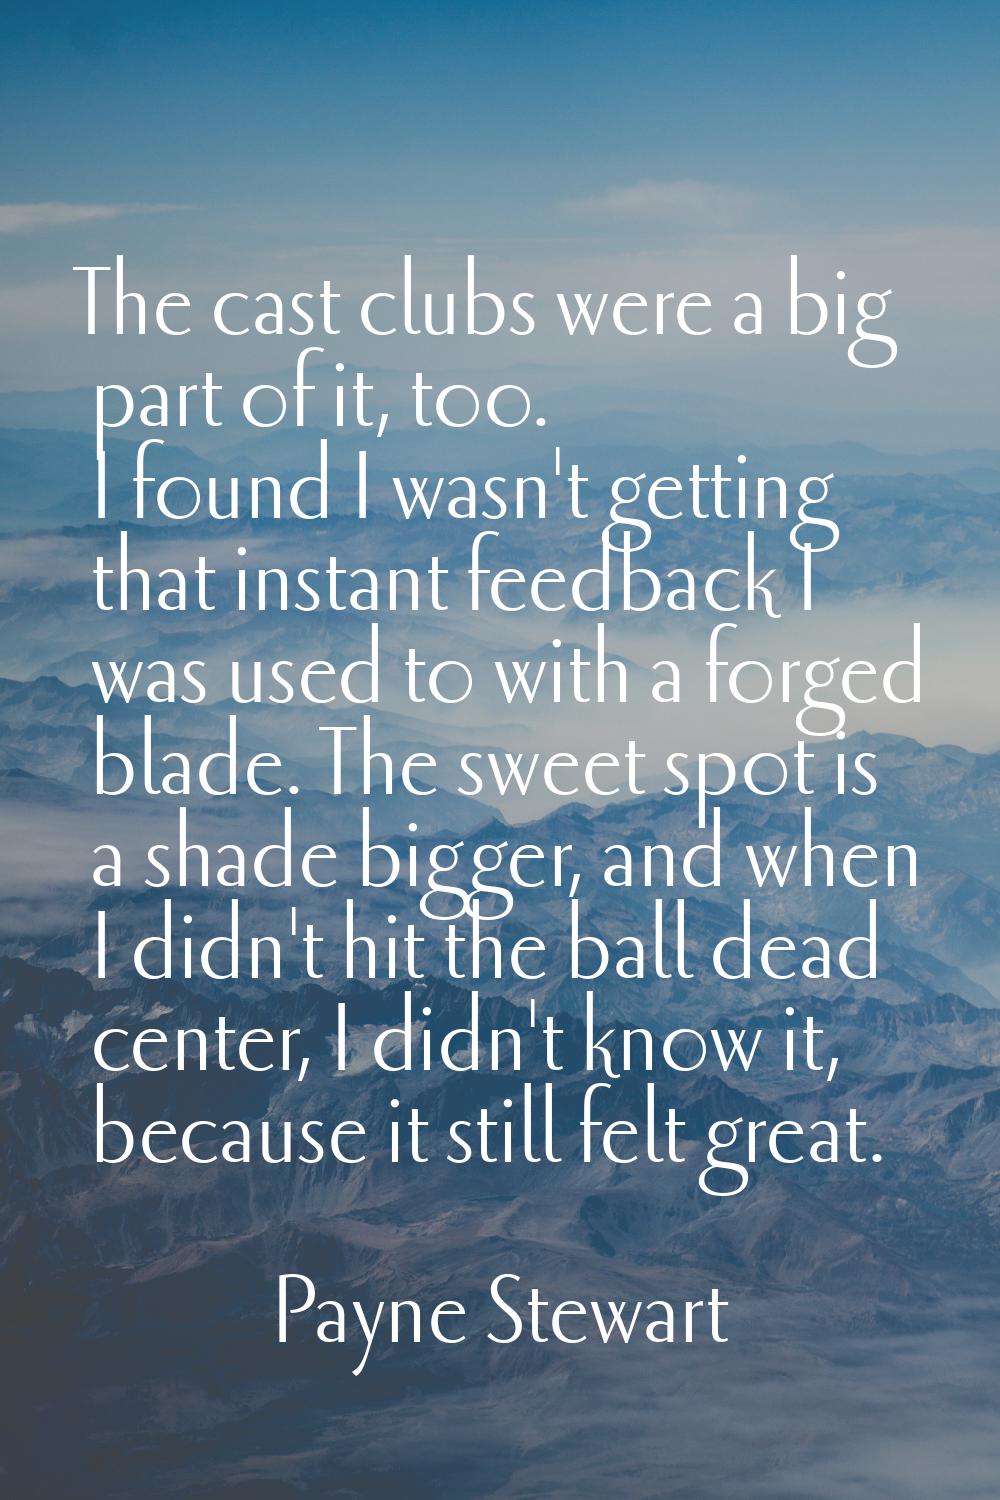 The cast clubs were a big part of it, too. I found I wasn't getting that instant feedback I was use